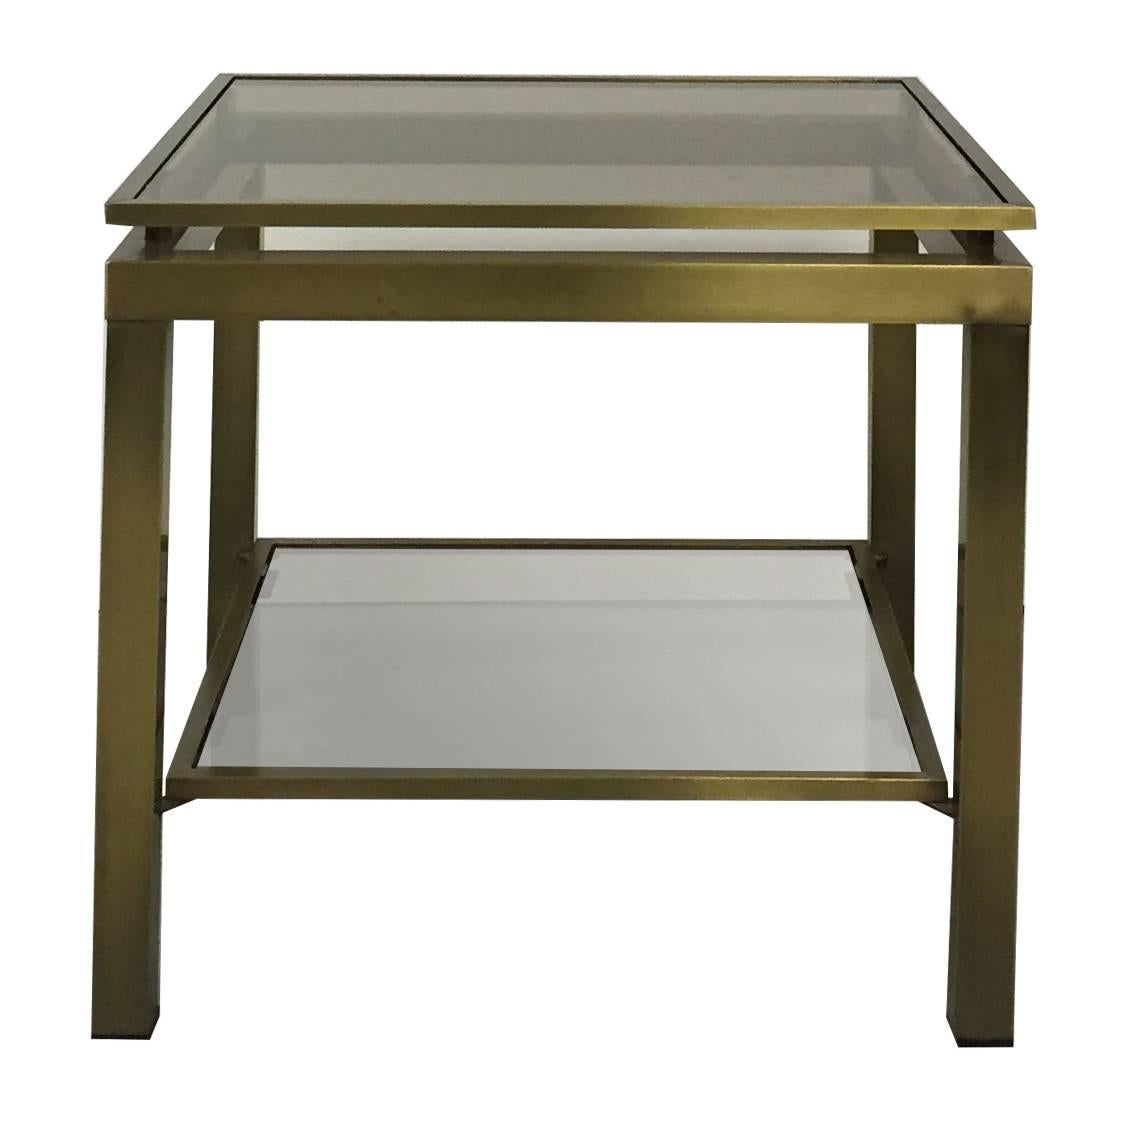 1970s, French Satin Brass Two-Tier Square Side Table by Guy Lefevre